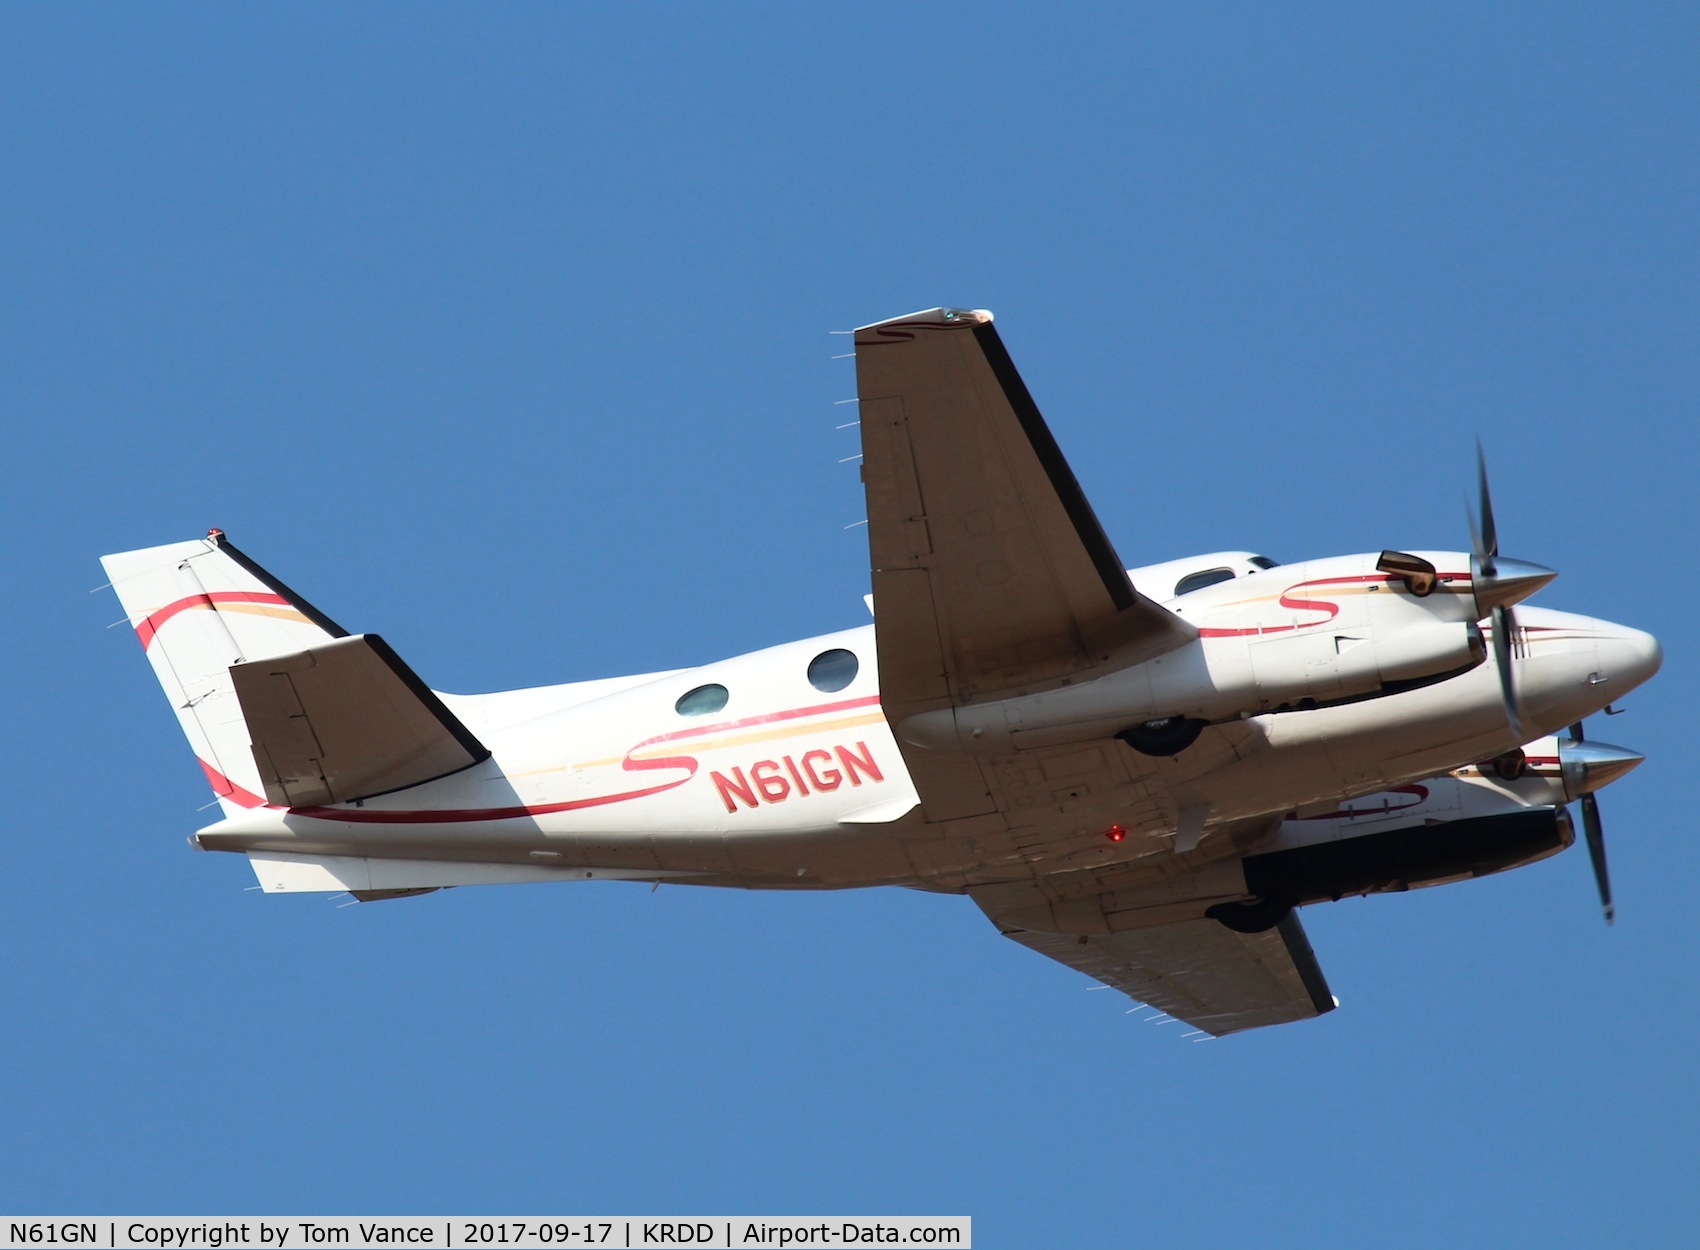 N61GN, Beech C90A King Air C/N LJ-1421, Redding based Beech C90 departing to the north during Fire Season in the Redding, CA area...